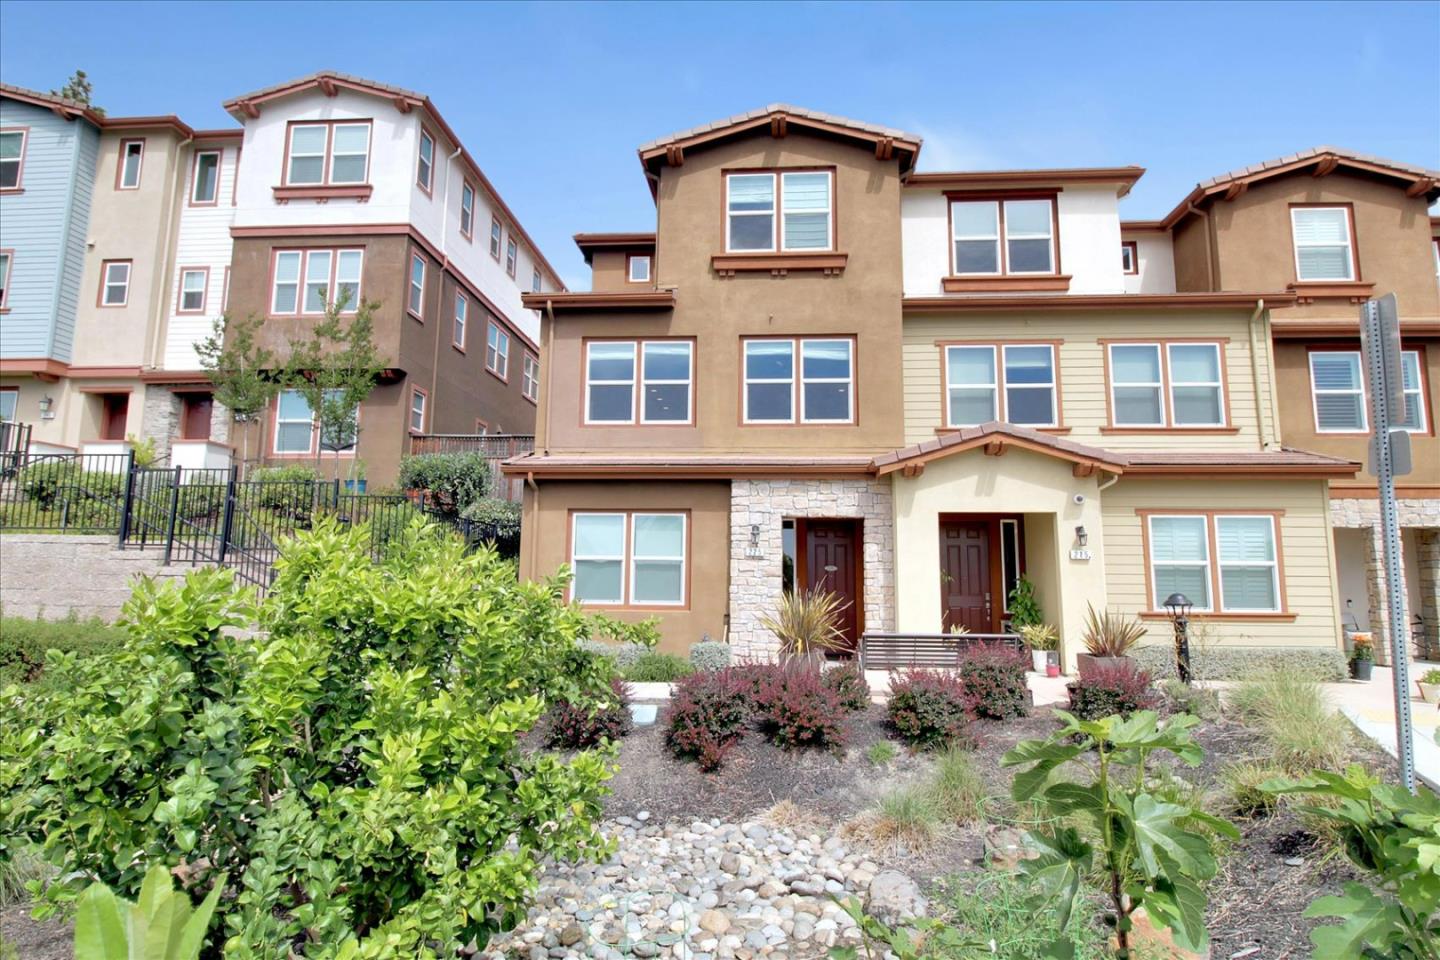 Absolutely gorgeous executive townhouse. One of the best location of the complex as an end-unit overlooking city and mountain views. This is 1 out of a few units in the entire complex that is zoned C2 to have business and residential mix. Ideal front unit with direct street access to ADA approved bedroom/work space, multi functional floor plan on ground floor w full bath. Middle floor has direct access to 2 car attached finished garage with family room, dining area, open airy gleaming gourmet kitchen for entertaining. Stunning marble island, stainless appliances and tile backsplash are a dream for the gourmet chef. Spacious maste-en-suite w deep walk-in closet, his/her marble vanity, luxurious shower/tub, washer and dryer upstairs for convenience. Recessed lighting throughout, upgraded carpet, epoxy garage with extra cabinets for storage, perfect location walk to shops and restaurants. Room for everyone including having a business at home!